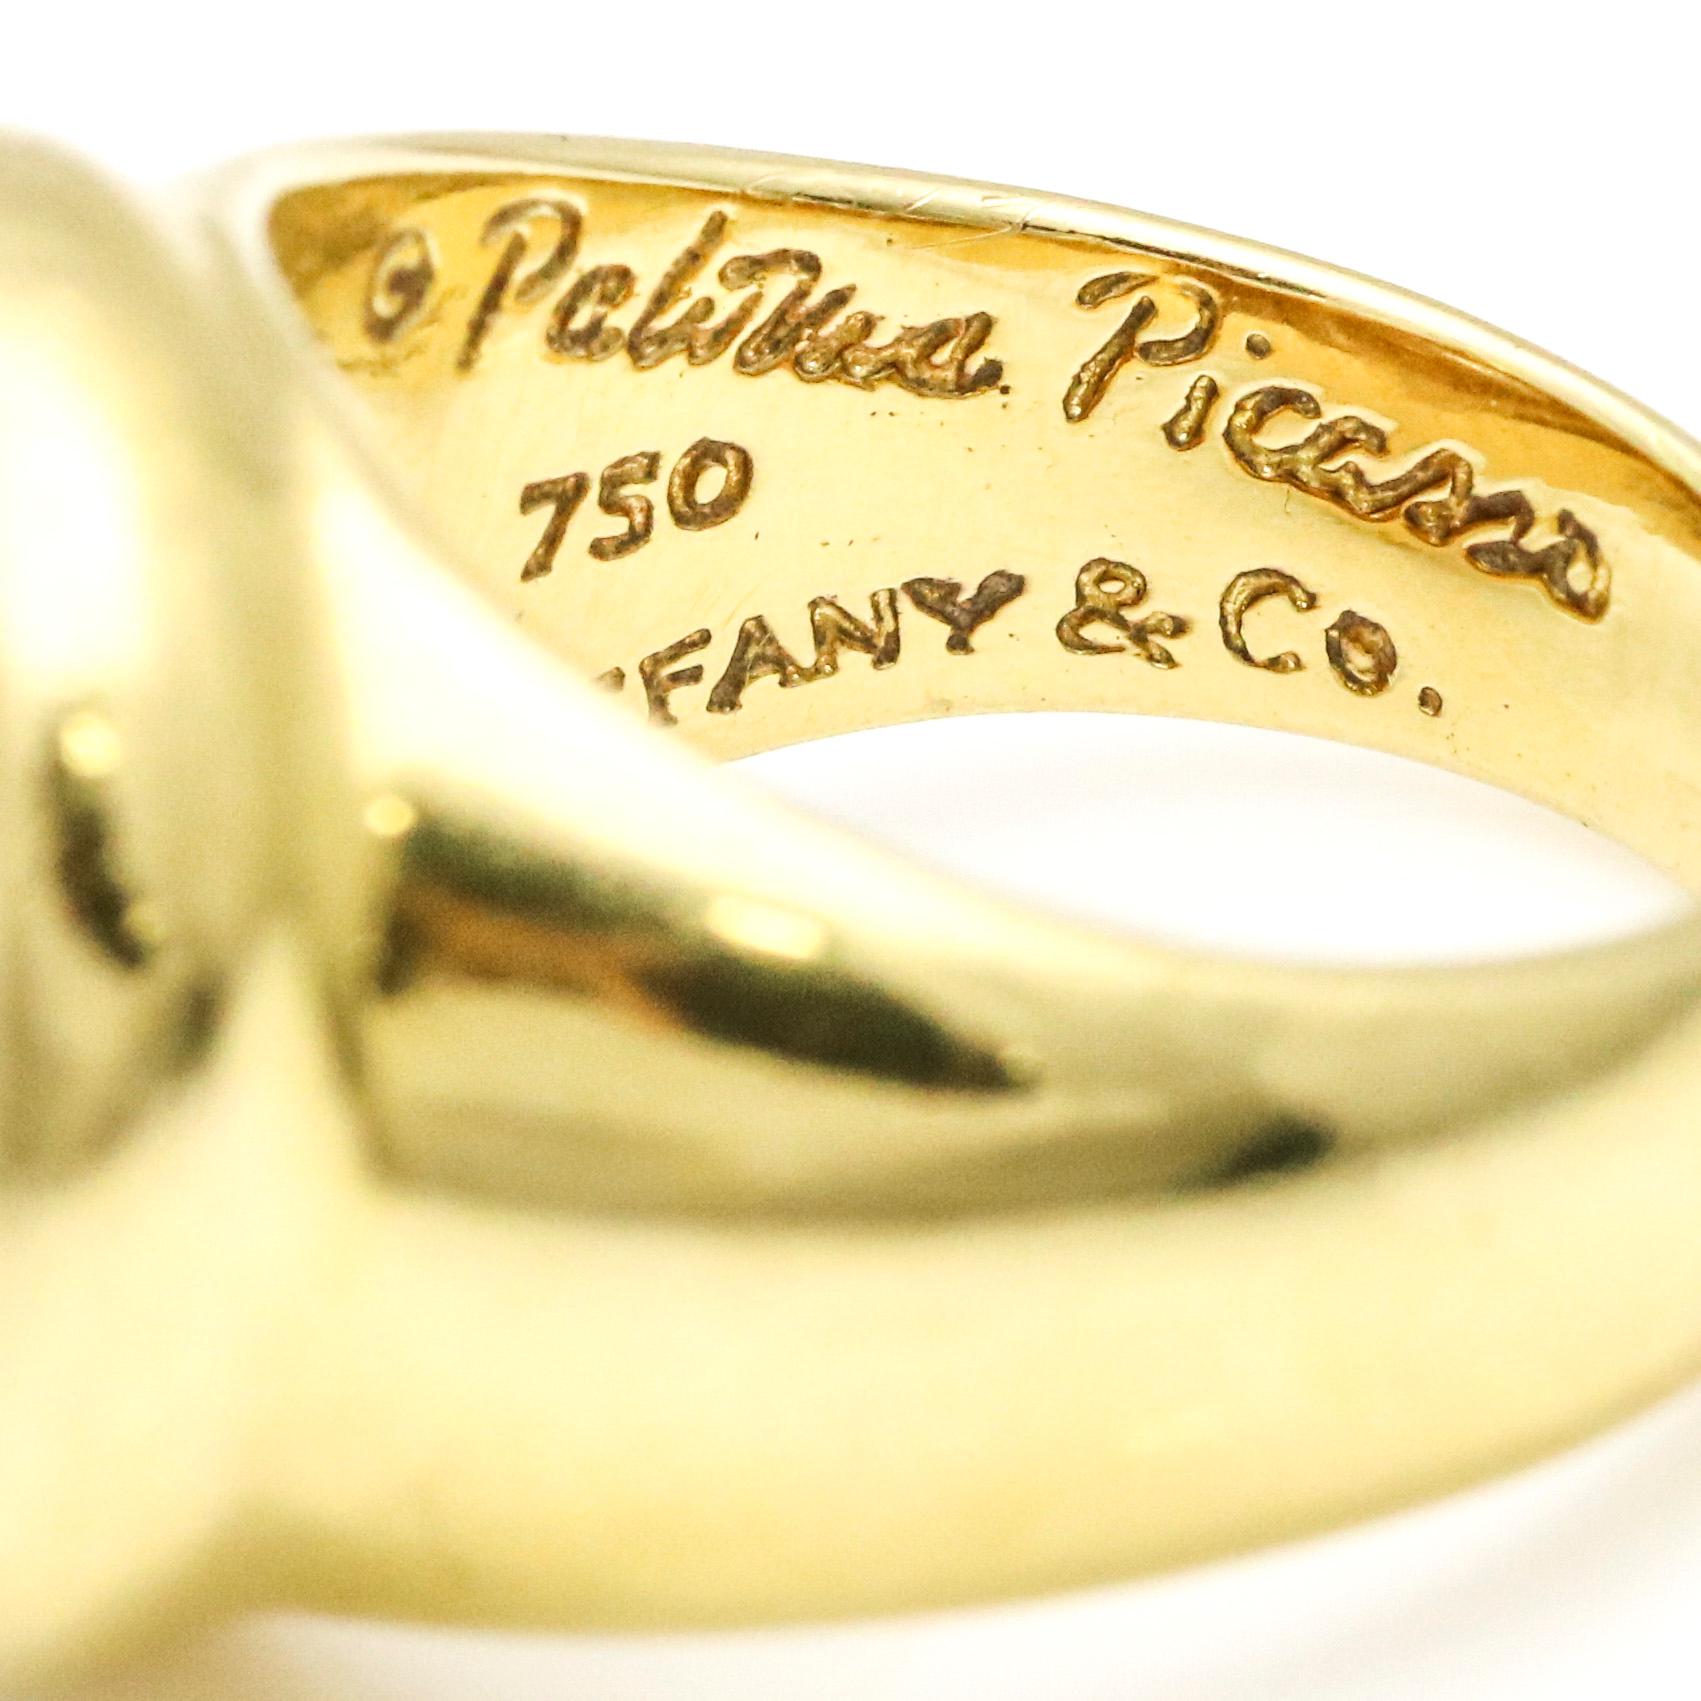 .51 Carat Tiffany & Co. Paloma Picasso 18 Karat Yellow Gold Diamond Ring In Good Condition For Sale In Fort Lauderdale, FL